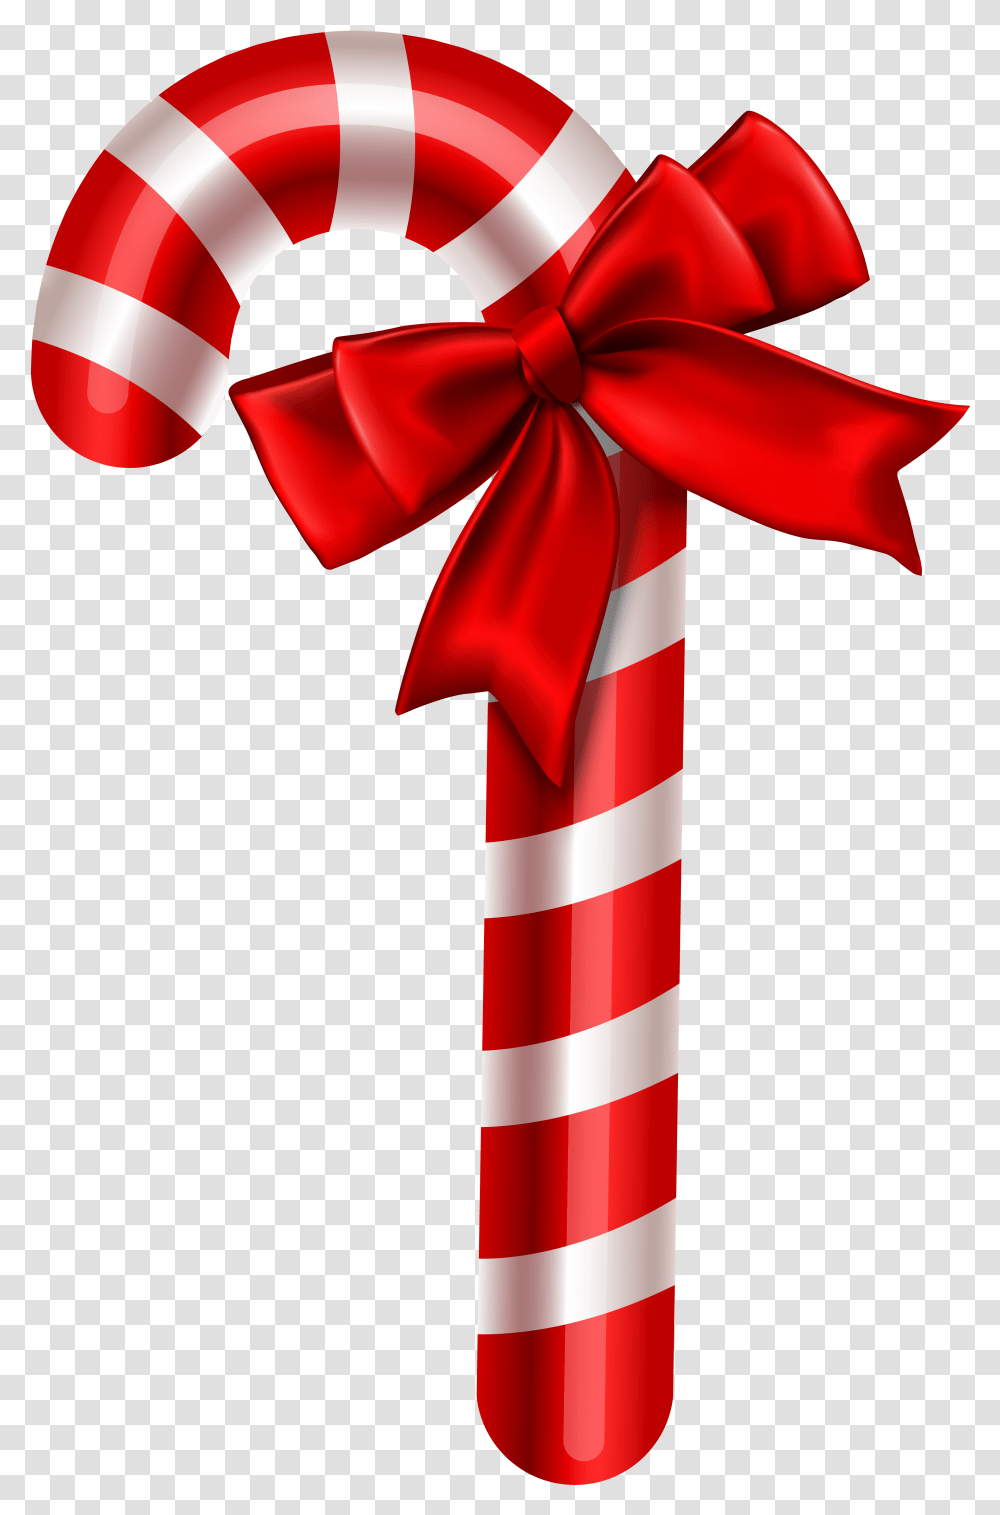 Download Christmas Ornament Candy Cane Canes, Food, Sweets, Confectionery, Lollipop Transparent Png